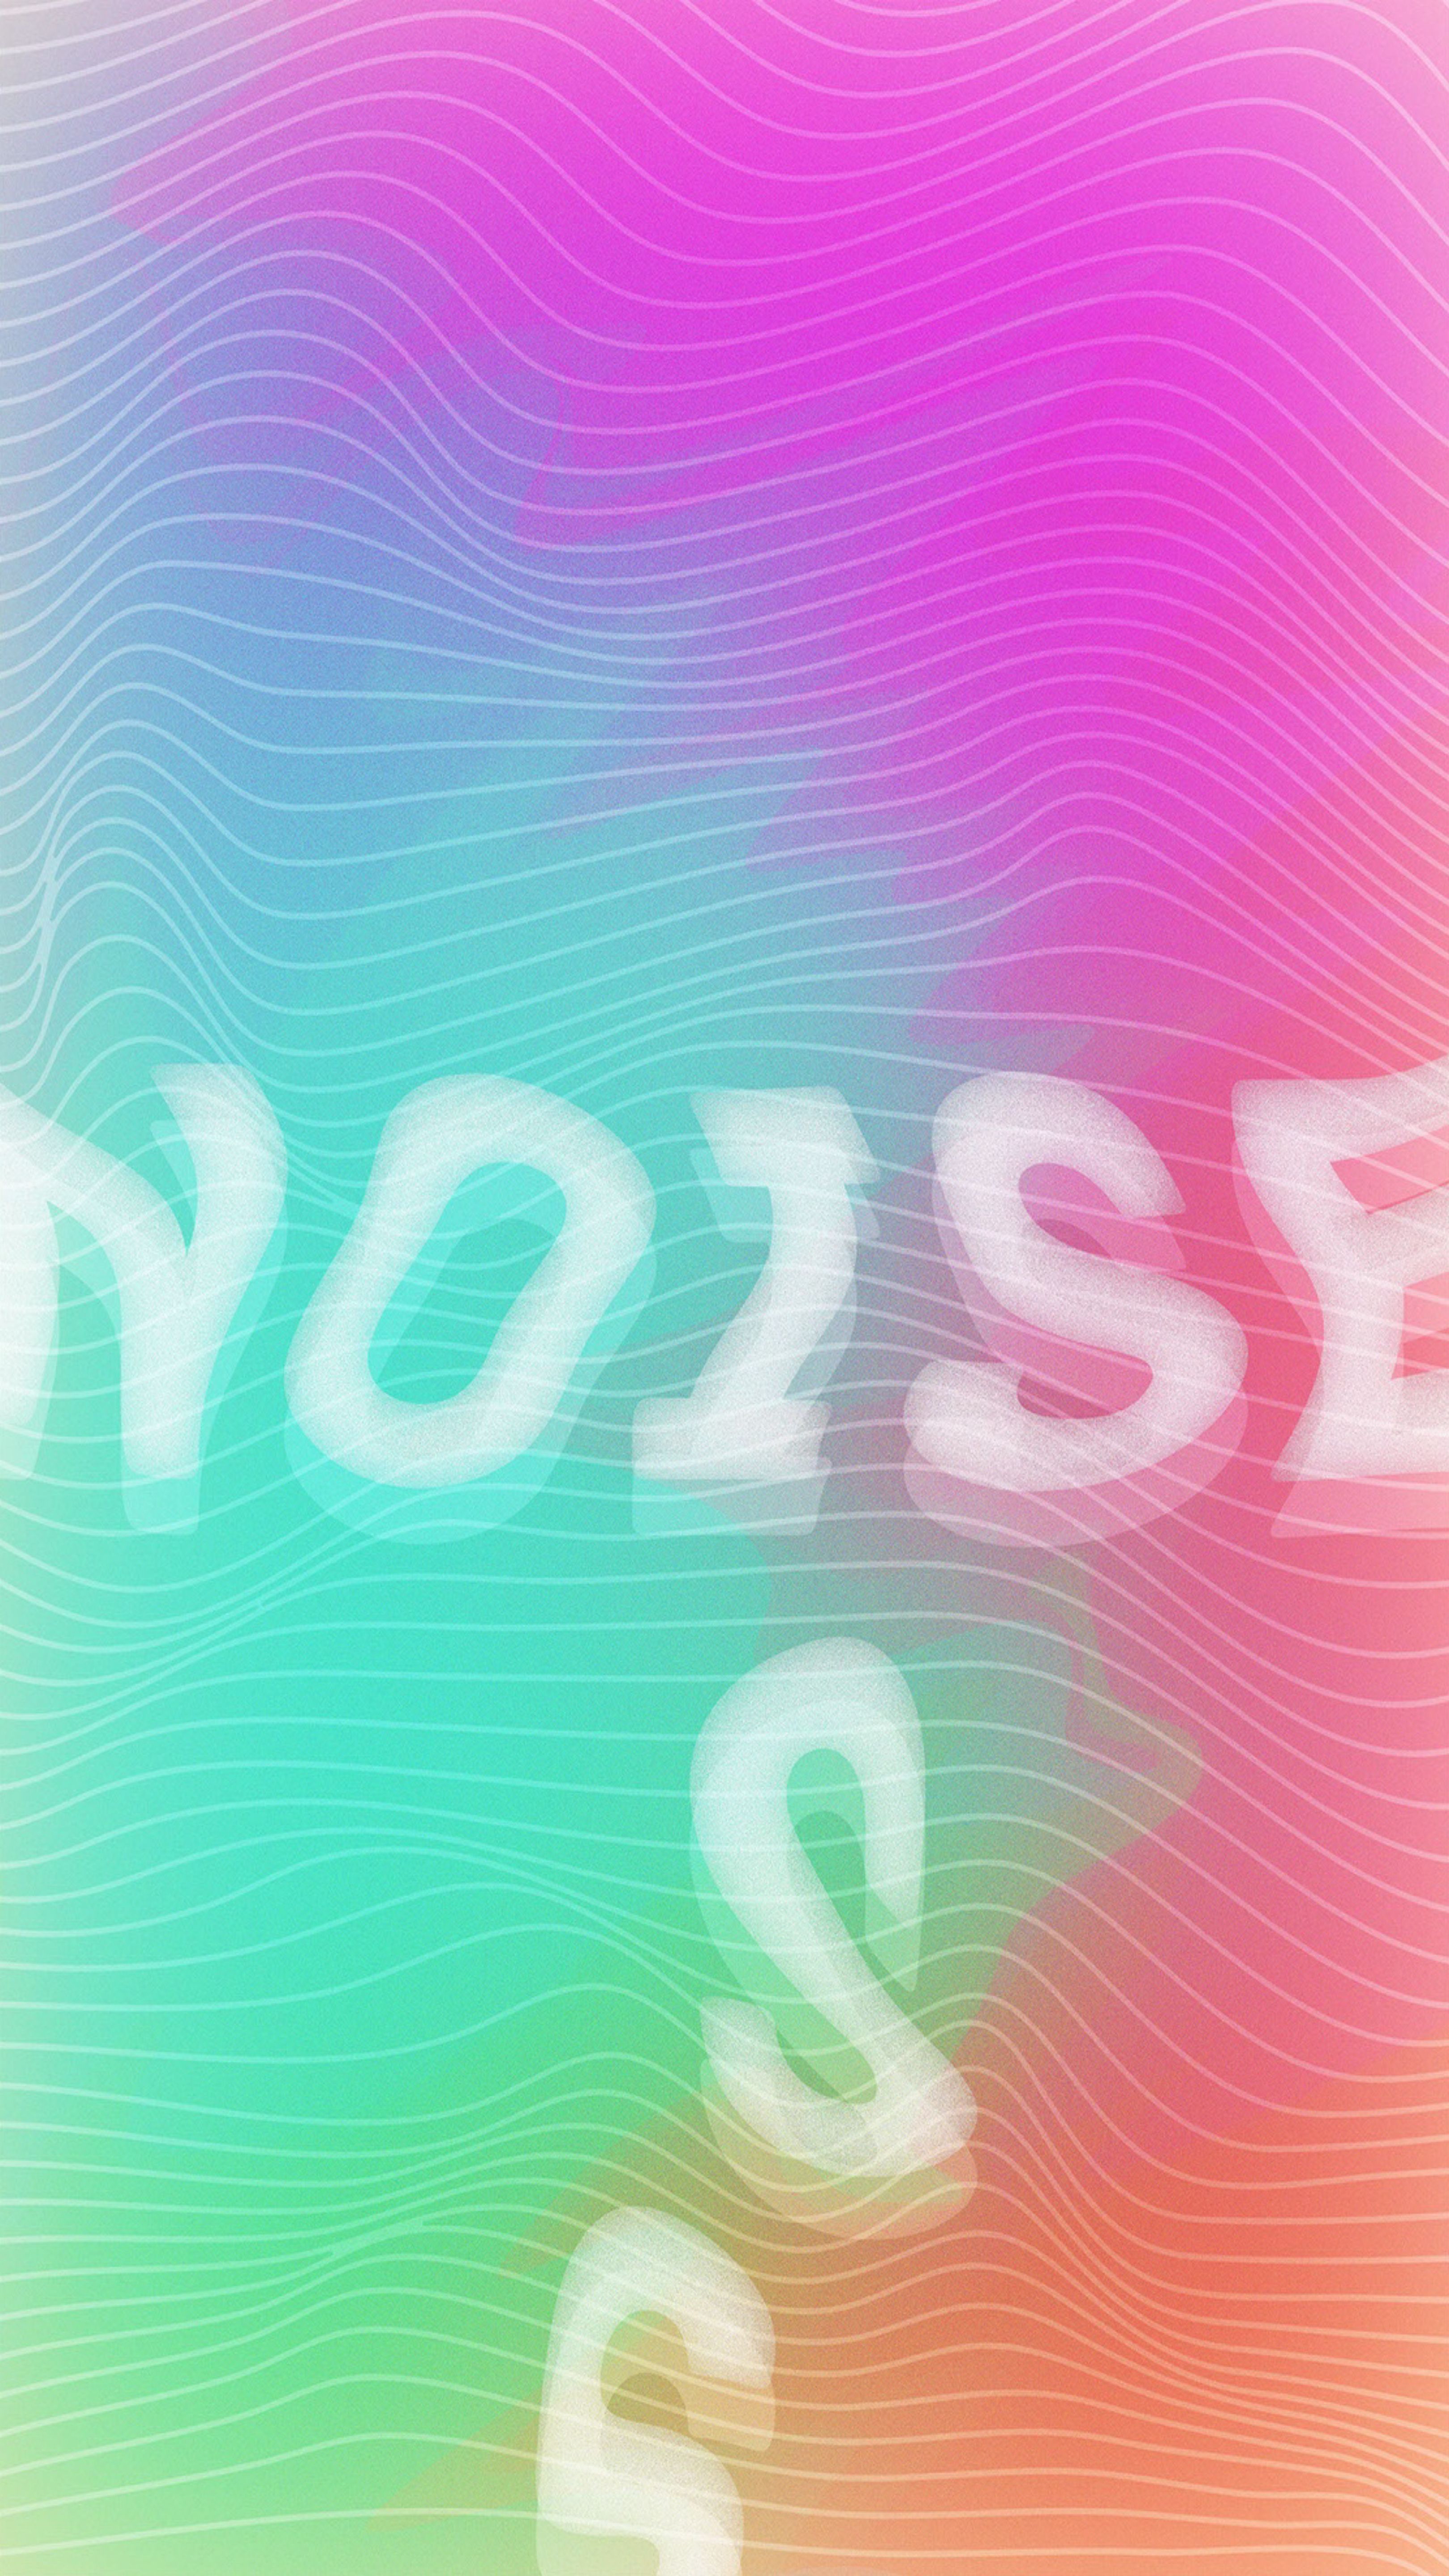  Noise HQ Background Images